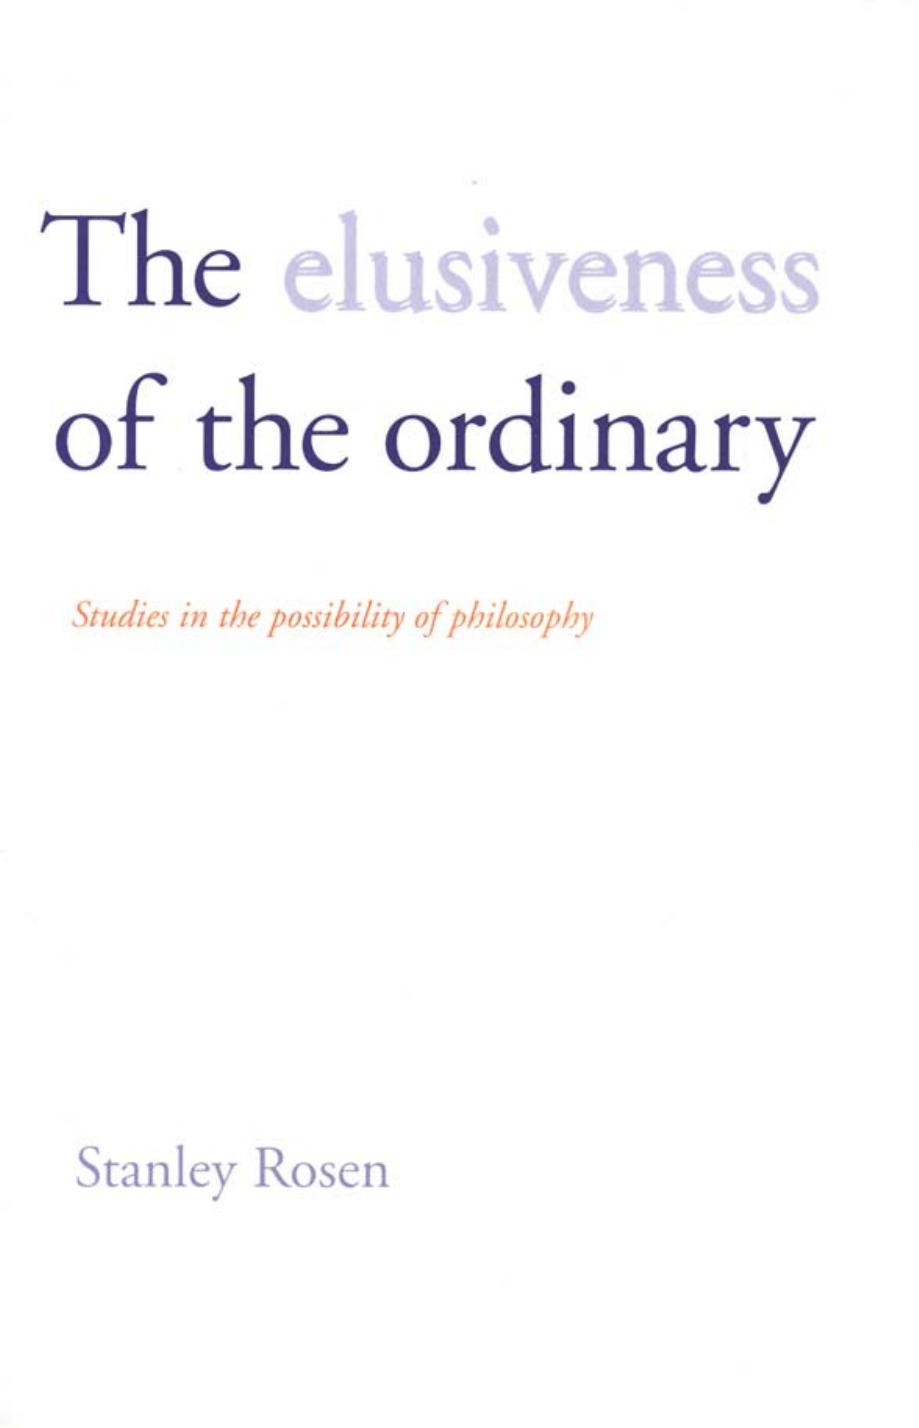 The Elusiveness of the Ordinary: Studies in the Possibility of Philosophy